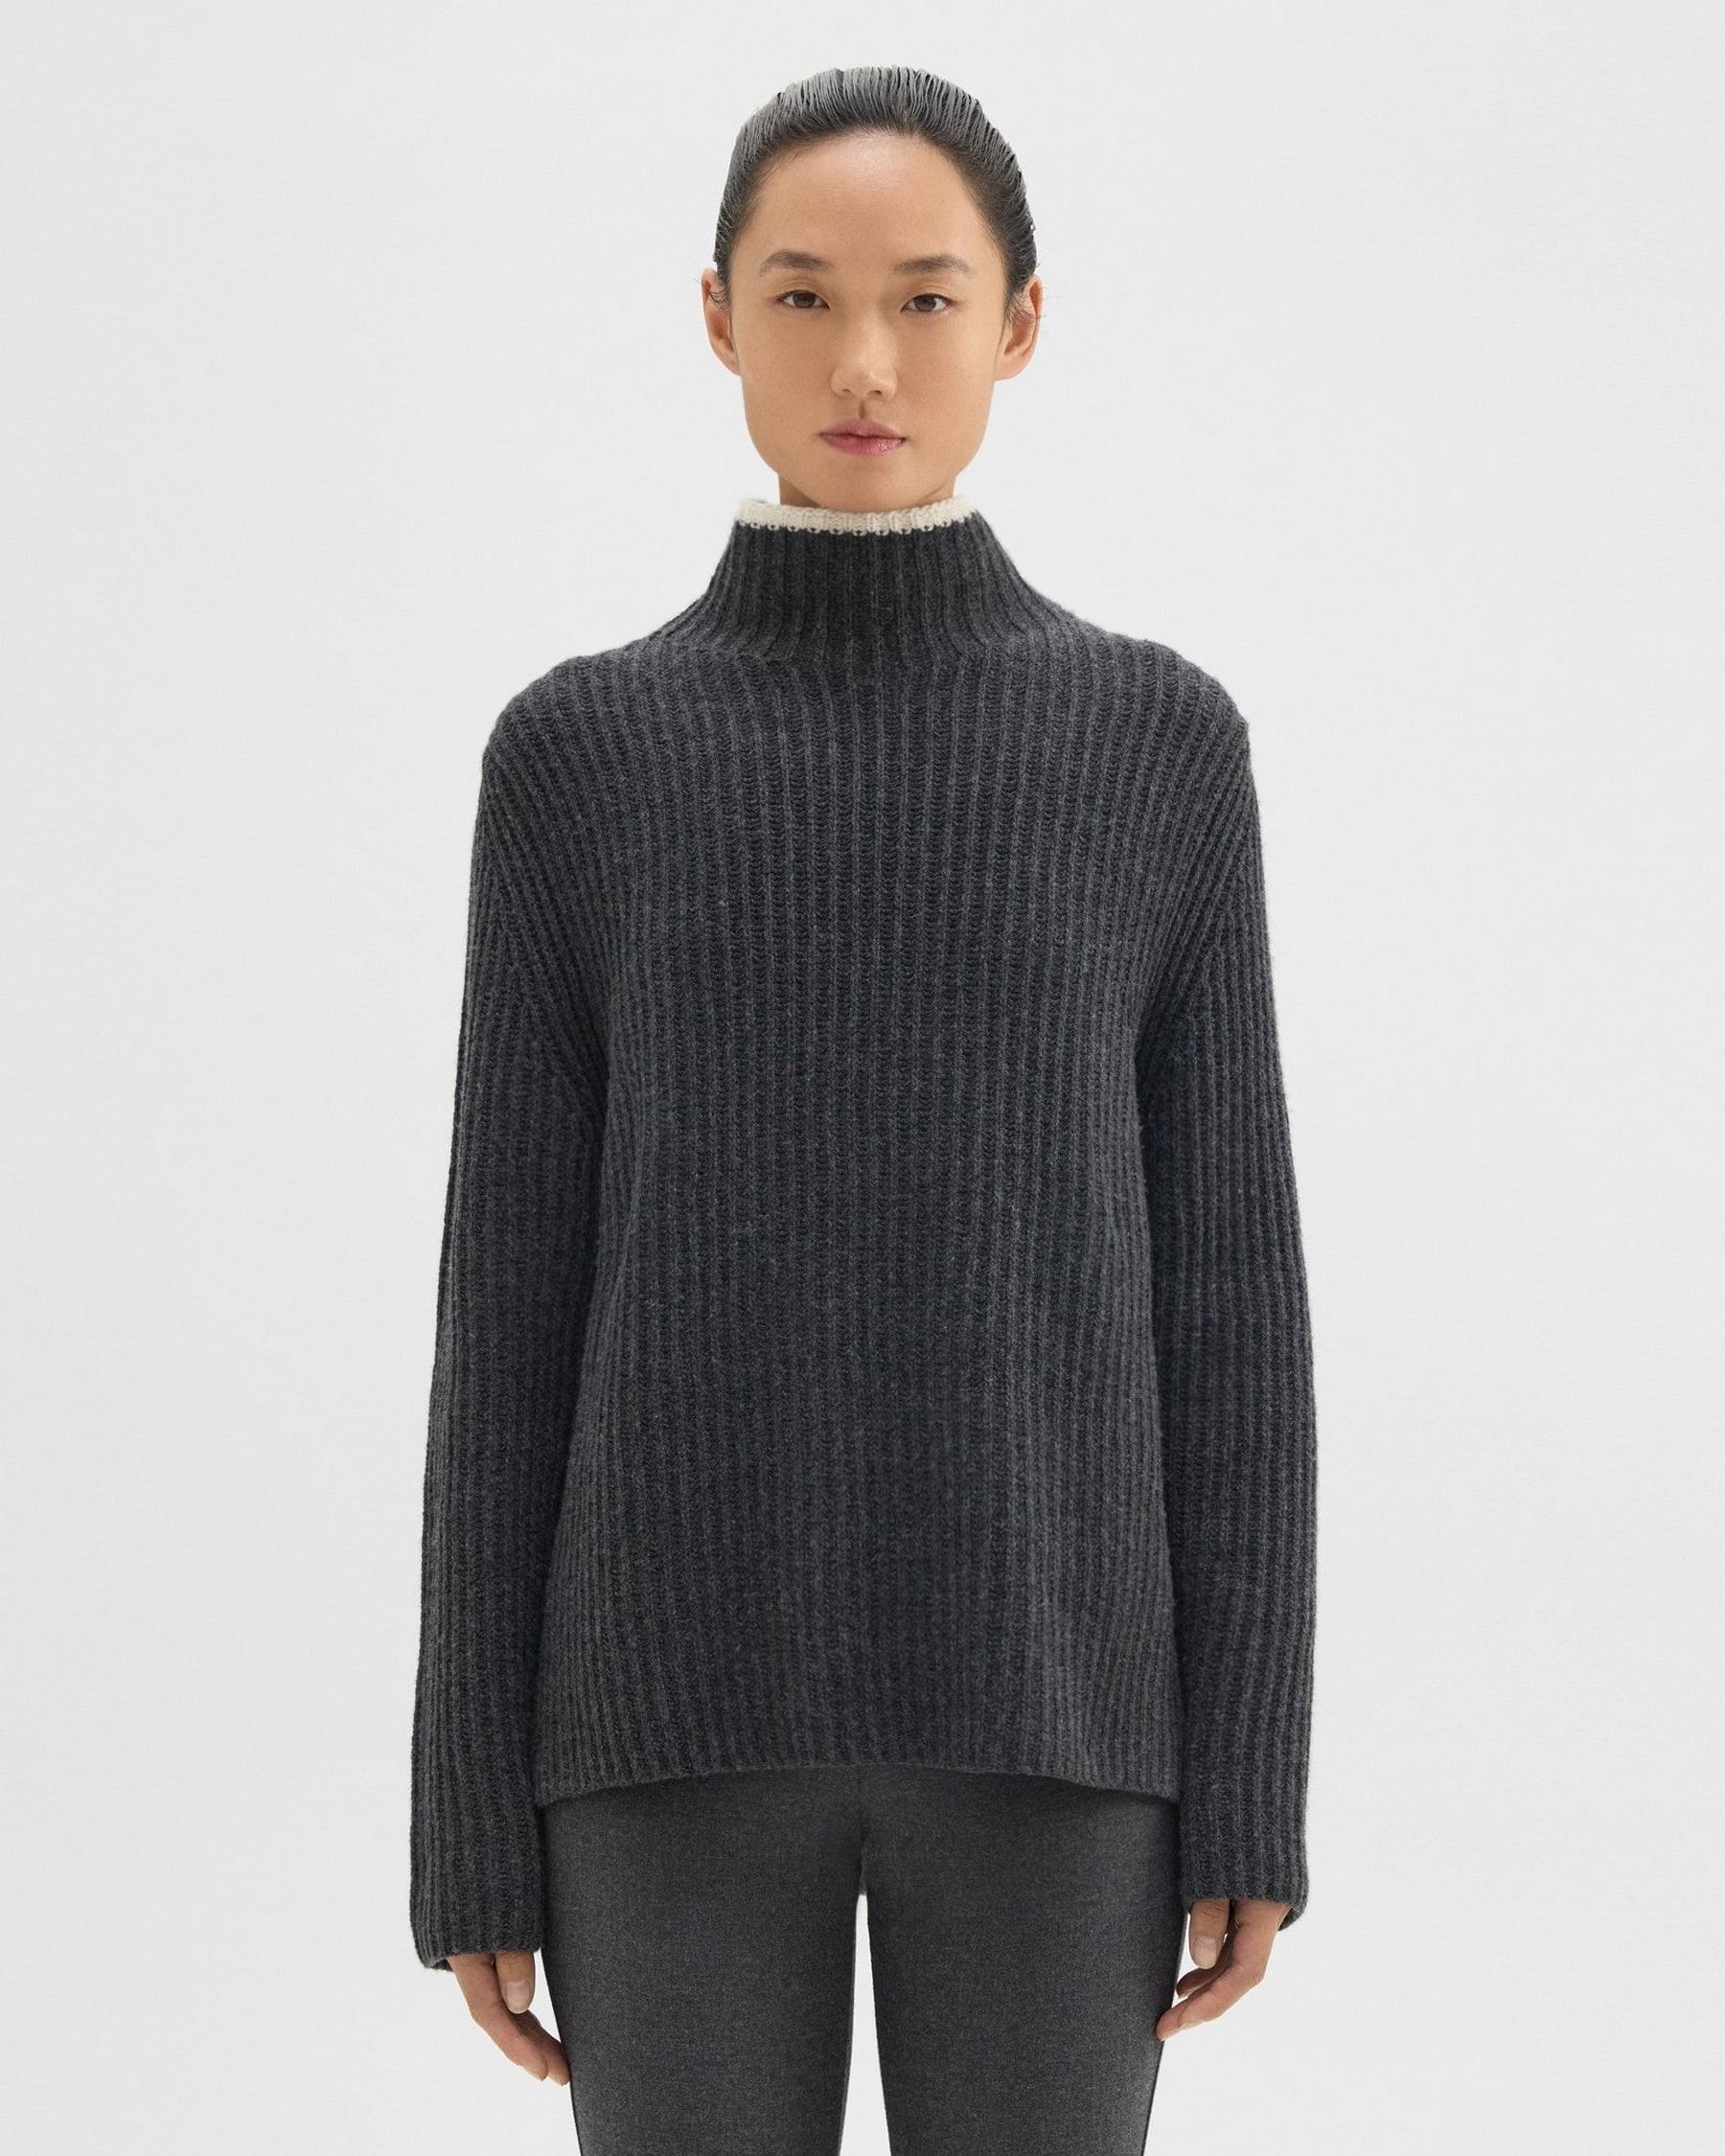 Karenia Turtleneck Sweater in Felted Wool-Cashmere